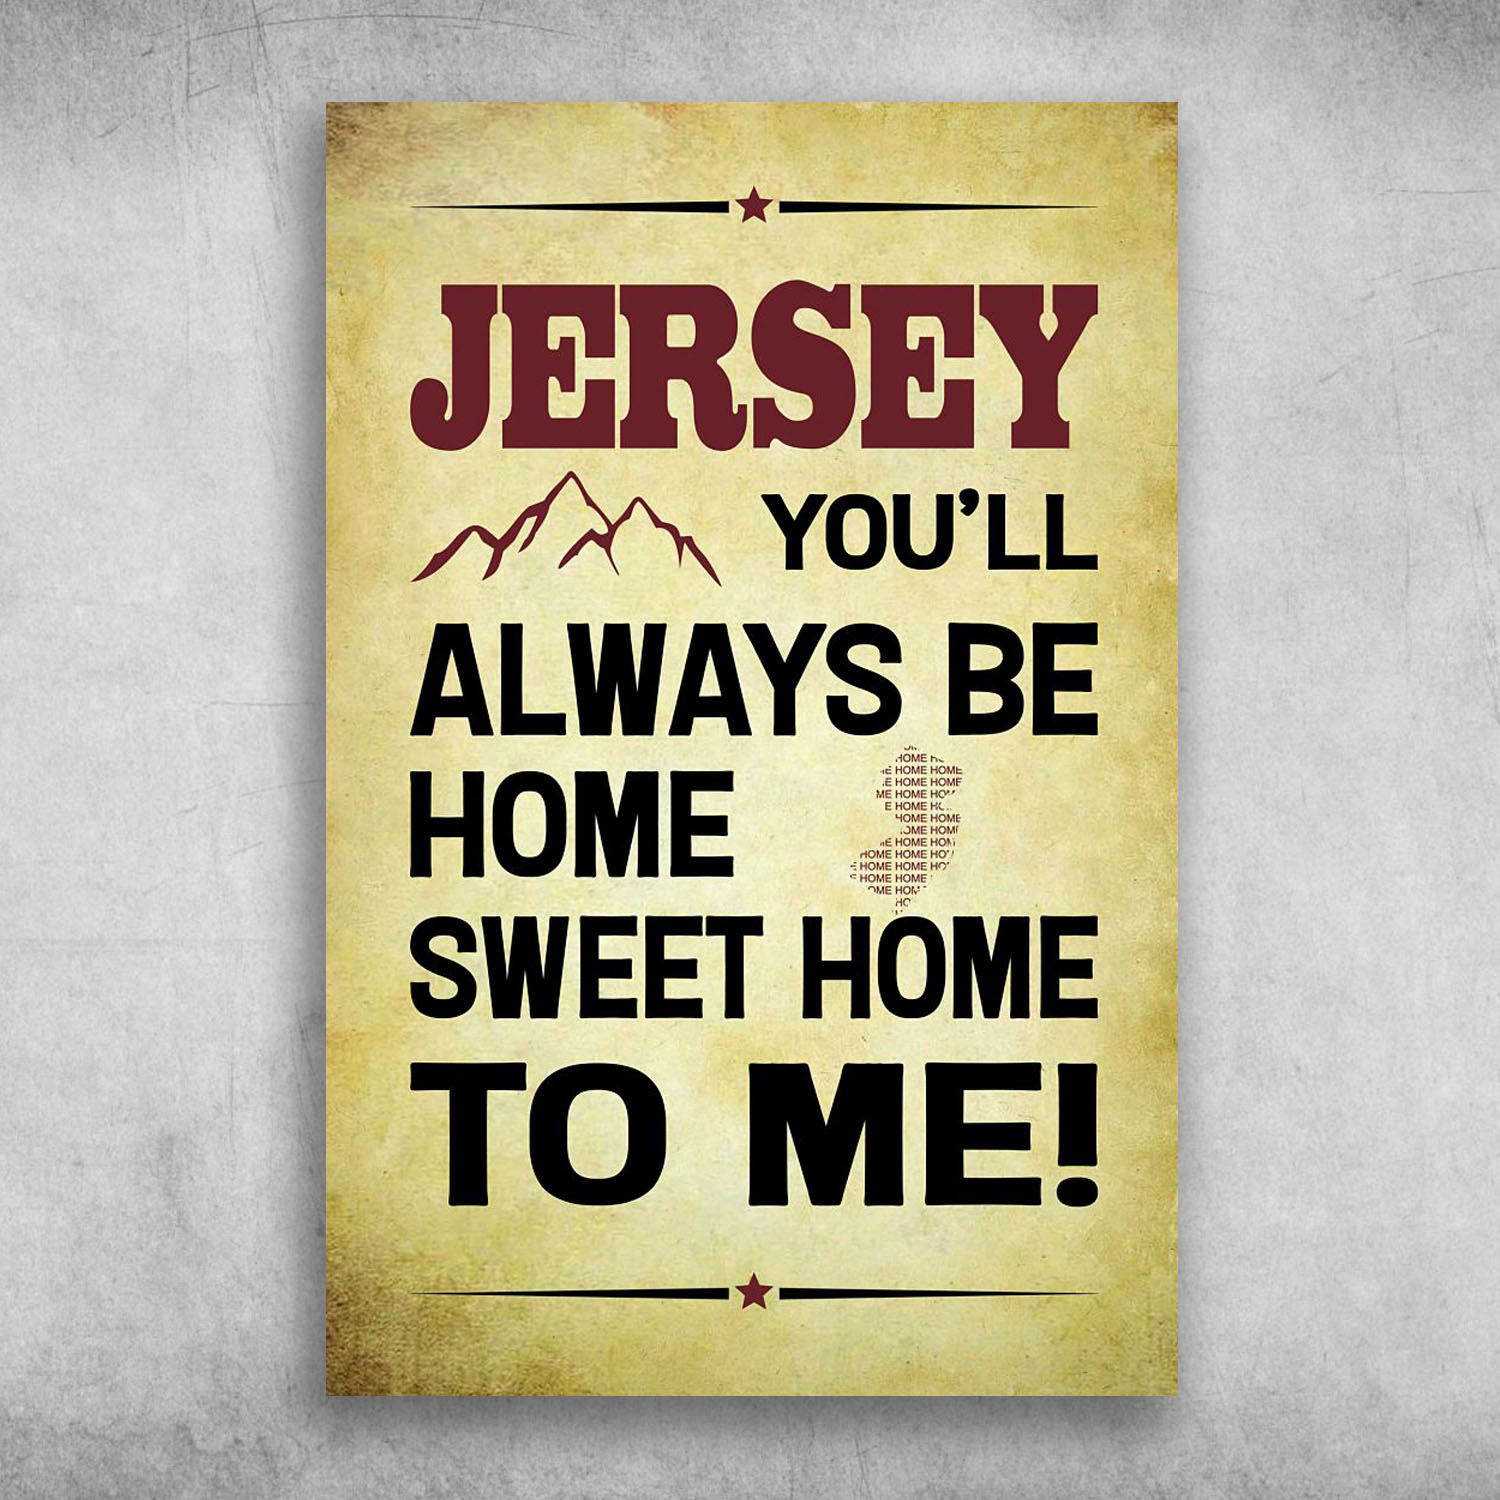 Jersey You'll Always Be Home Sweet Home To Me